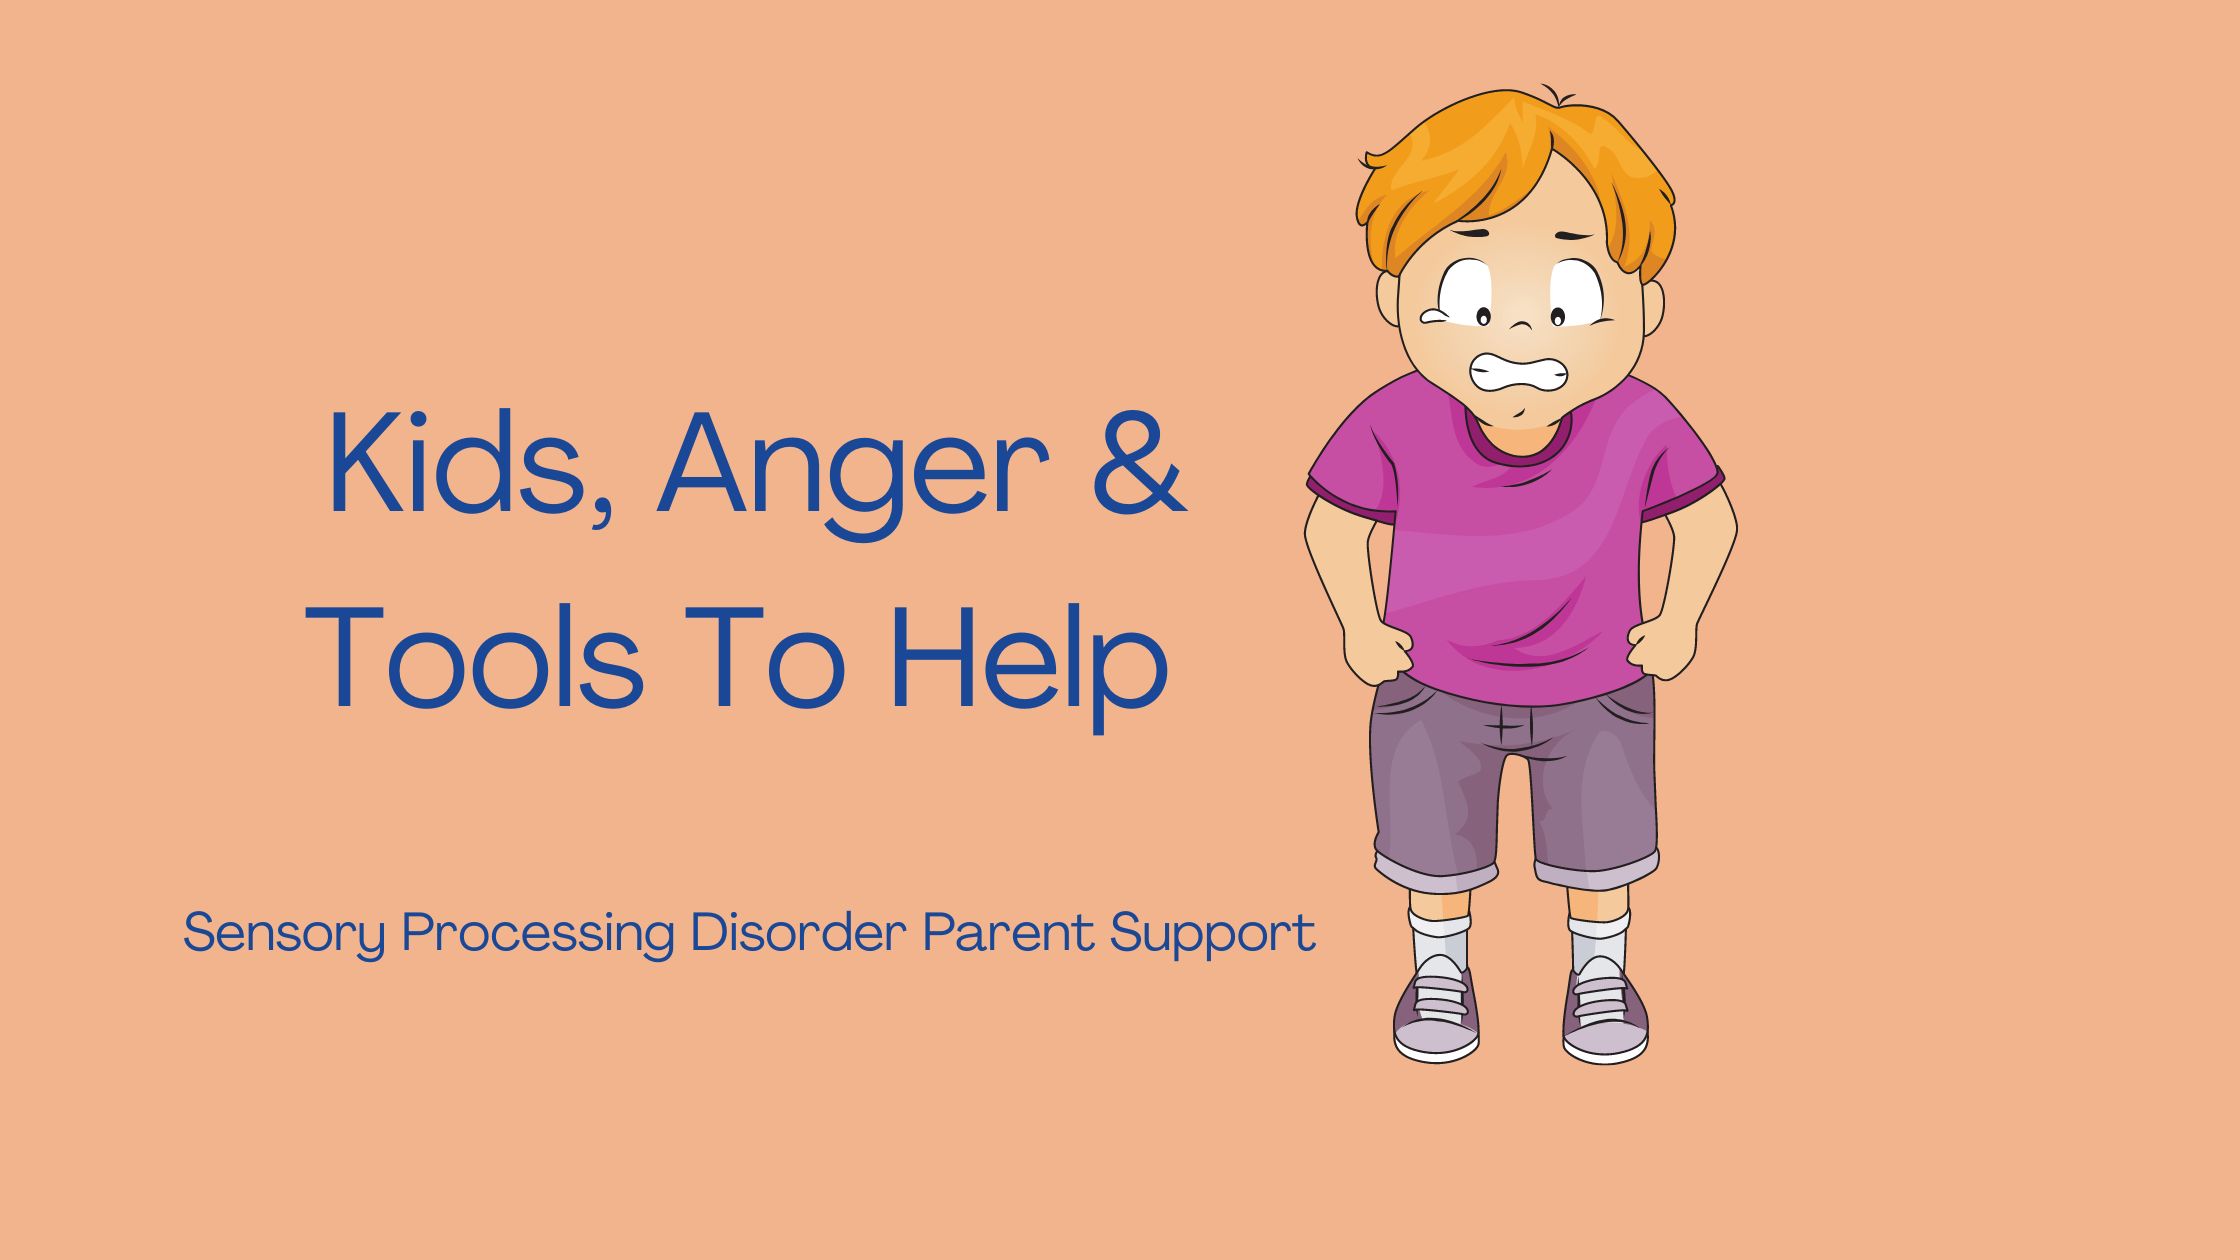 angry child who has sensory processing disorder child who is upset and frustrated Kids, Anger & Tools To Help